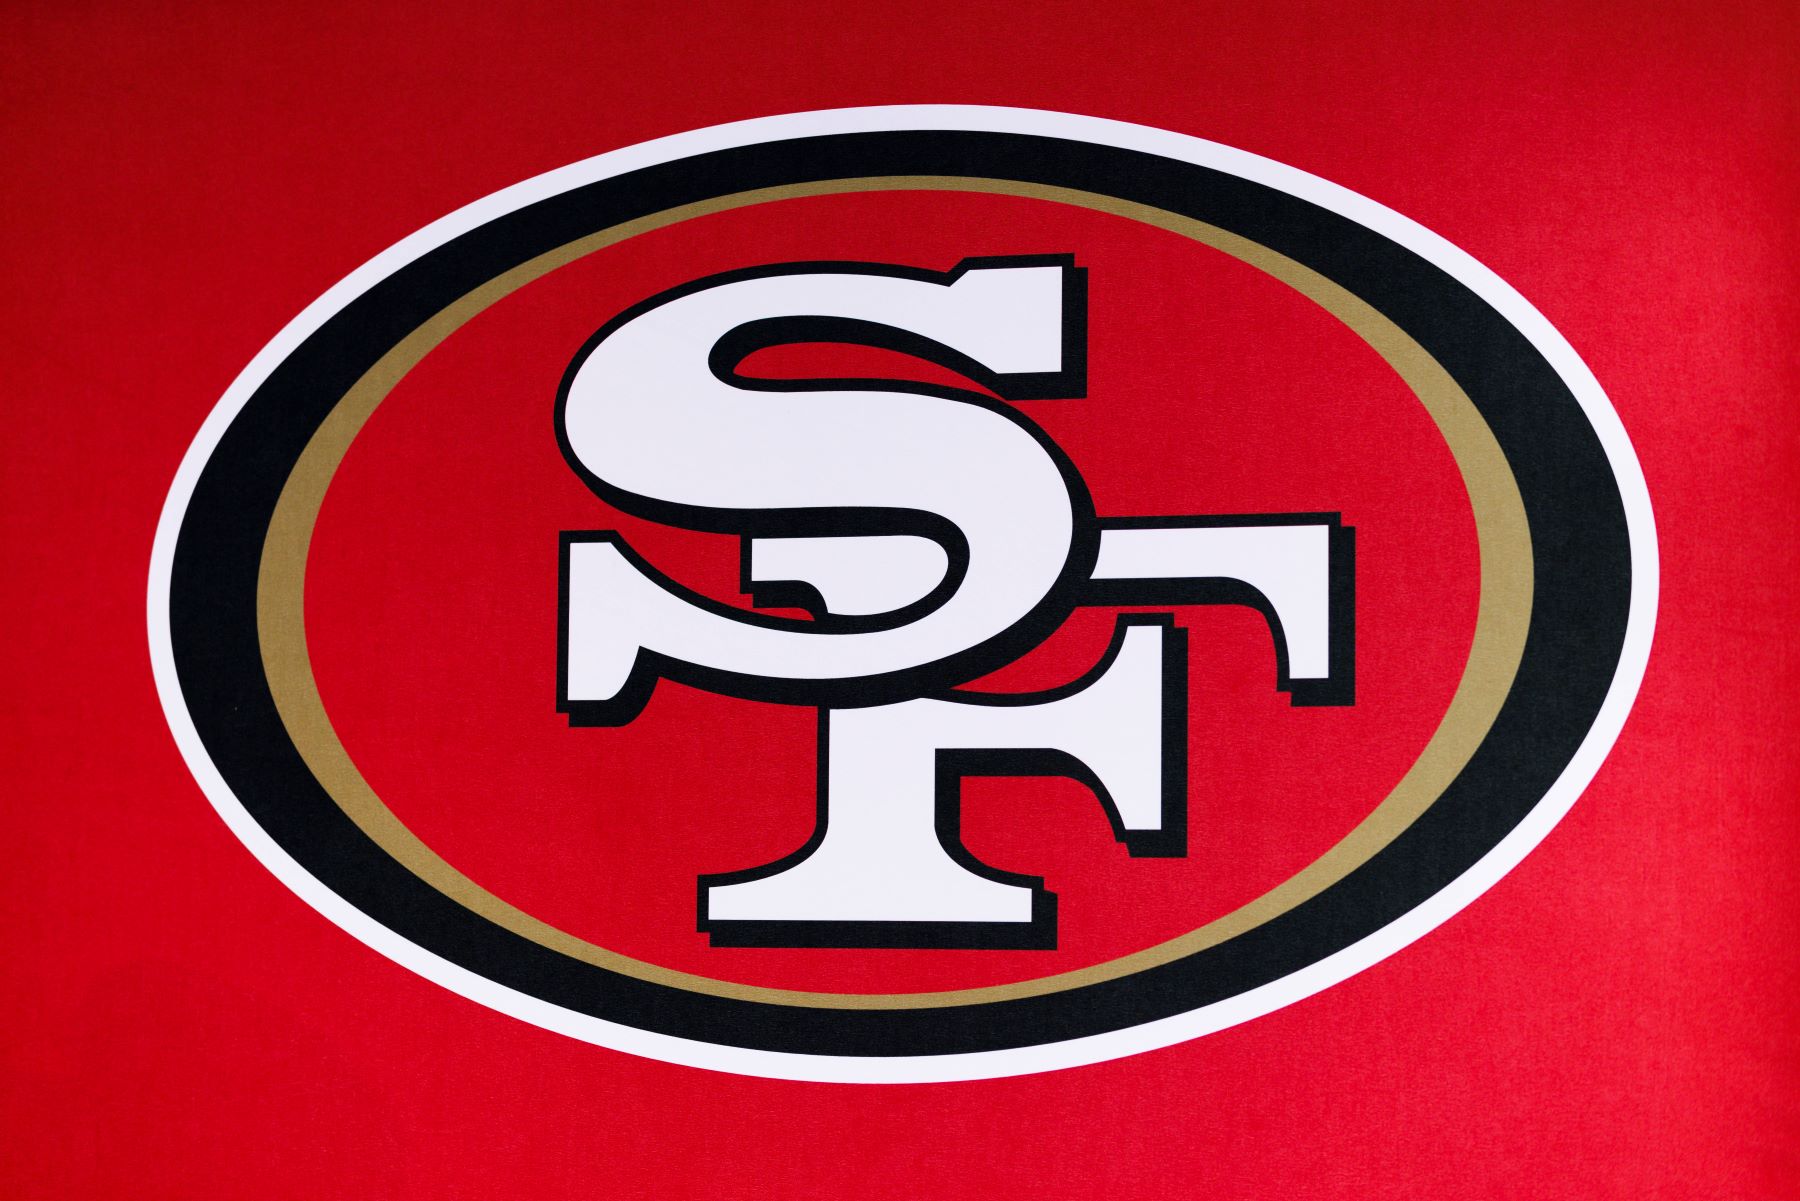 NFL team San Francisco 49ers logo seen at the Los Angeles Convention Center during the Super Bowl Experience